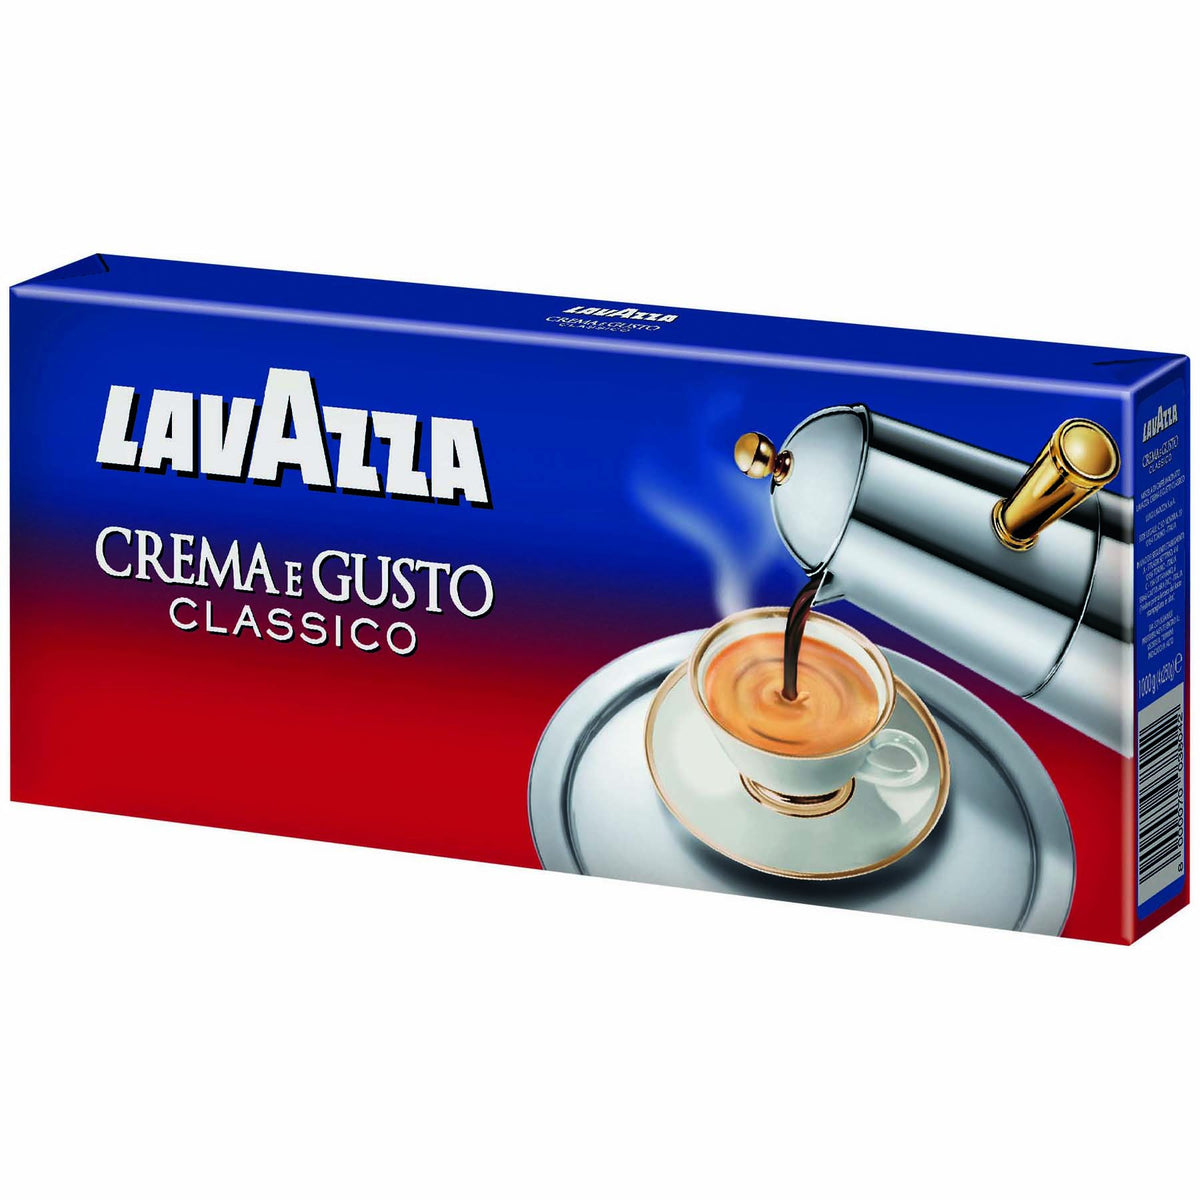 Lavazza Crema E Gusto Whole Bean Coffee 1 kg Bag, Authentic Italian,  Blended and roasted in Italy, Full-bodied, creamy dark roast with spices  notes